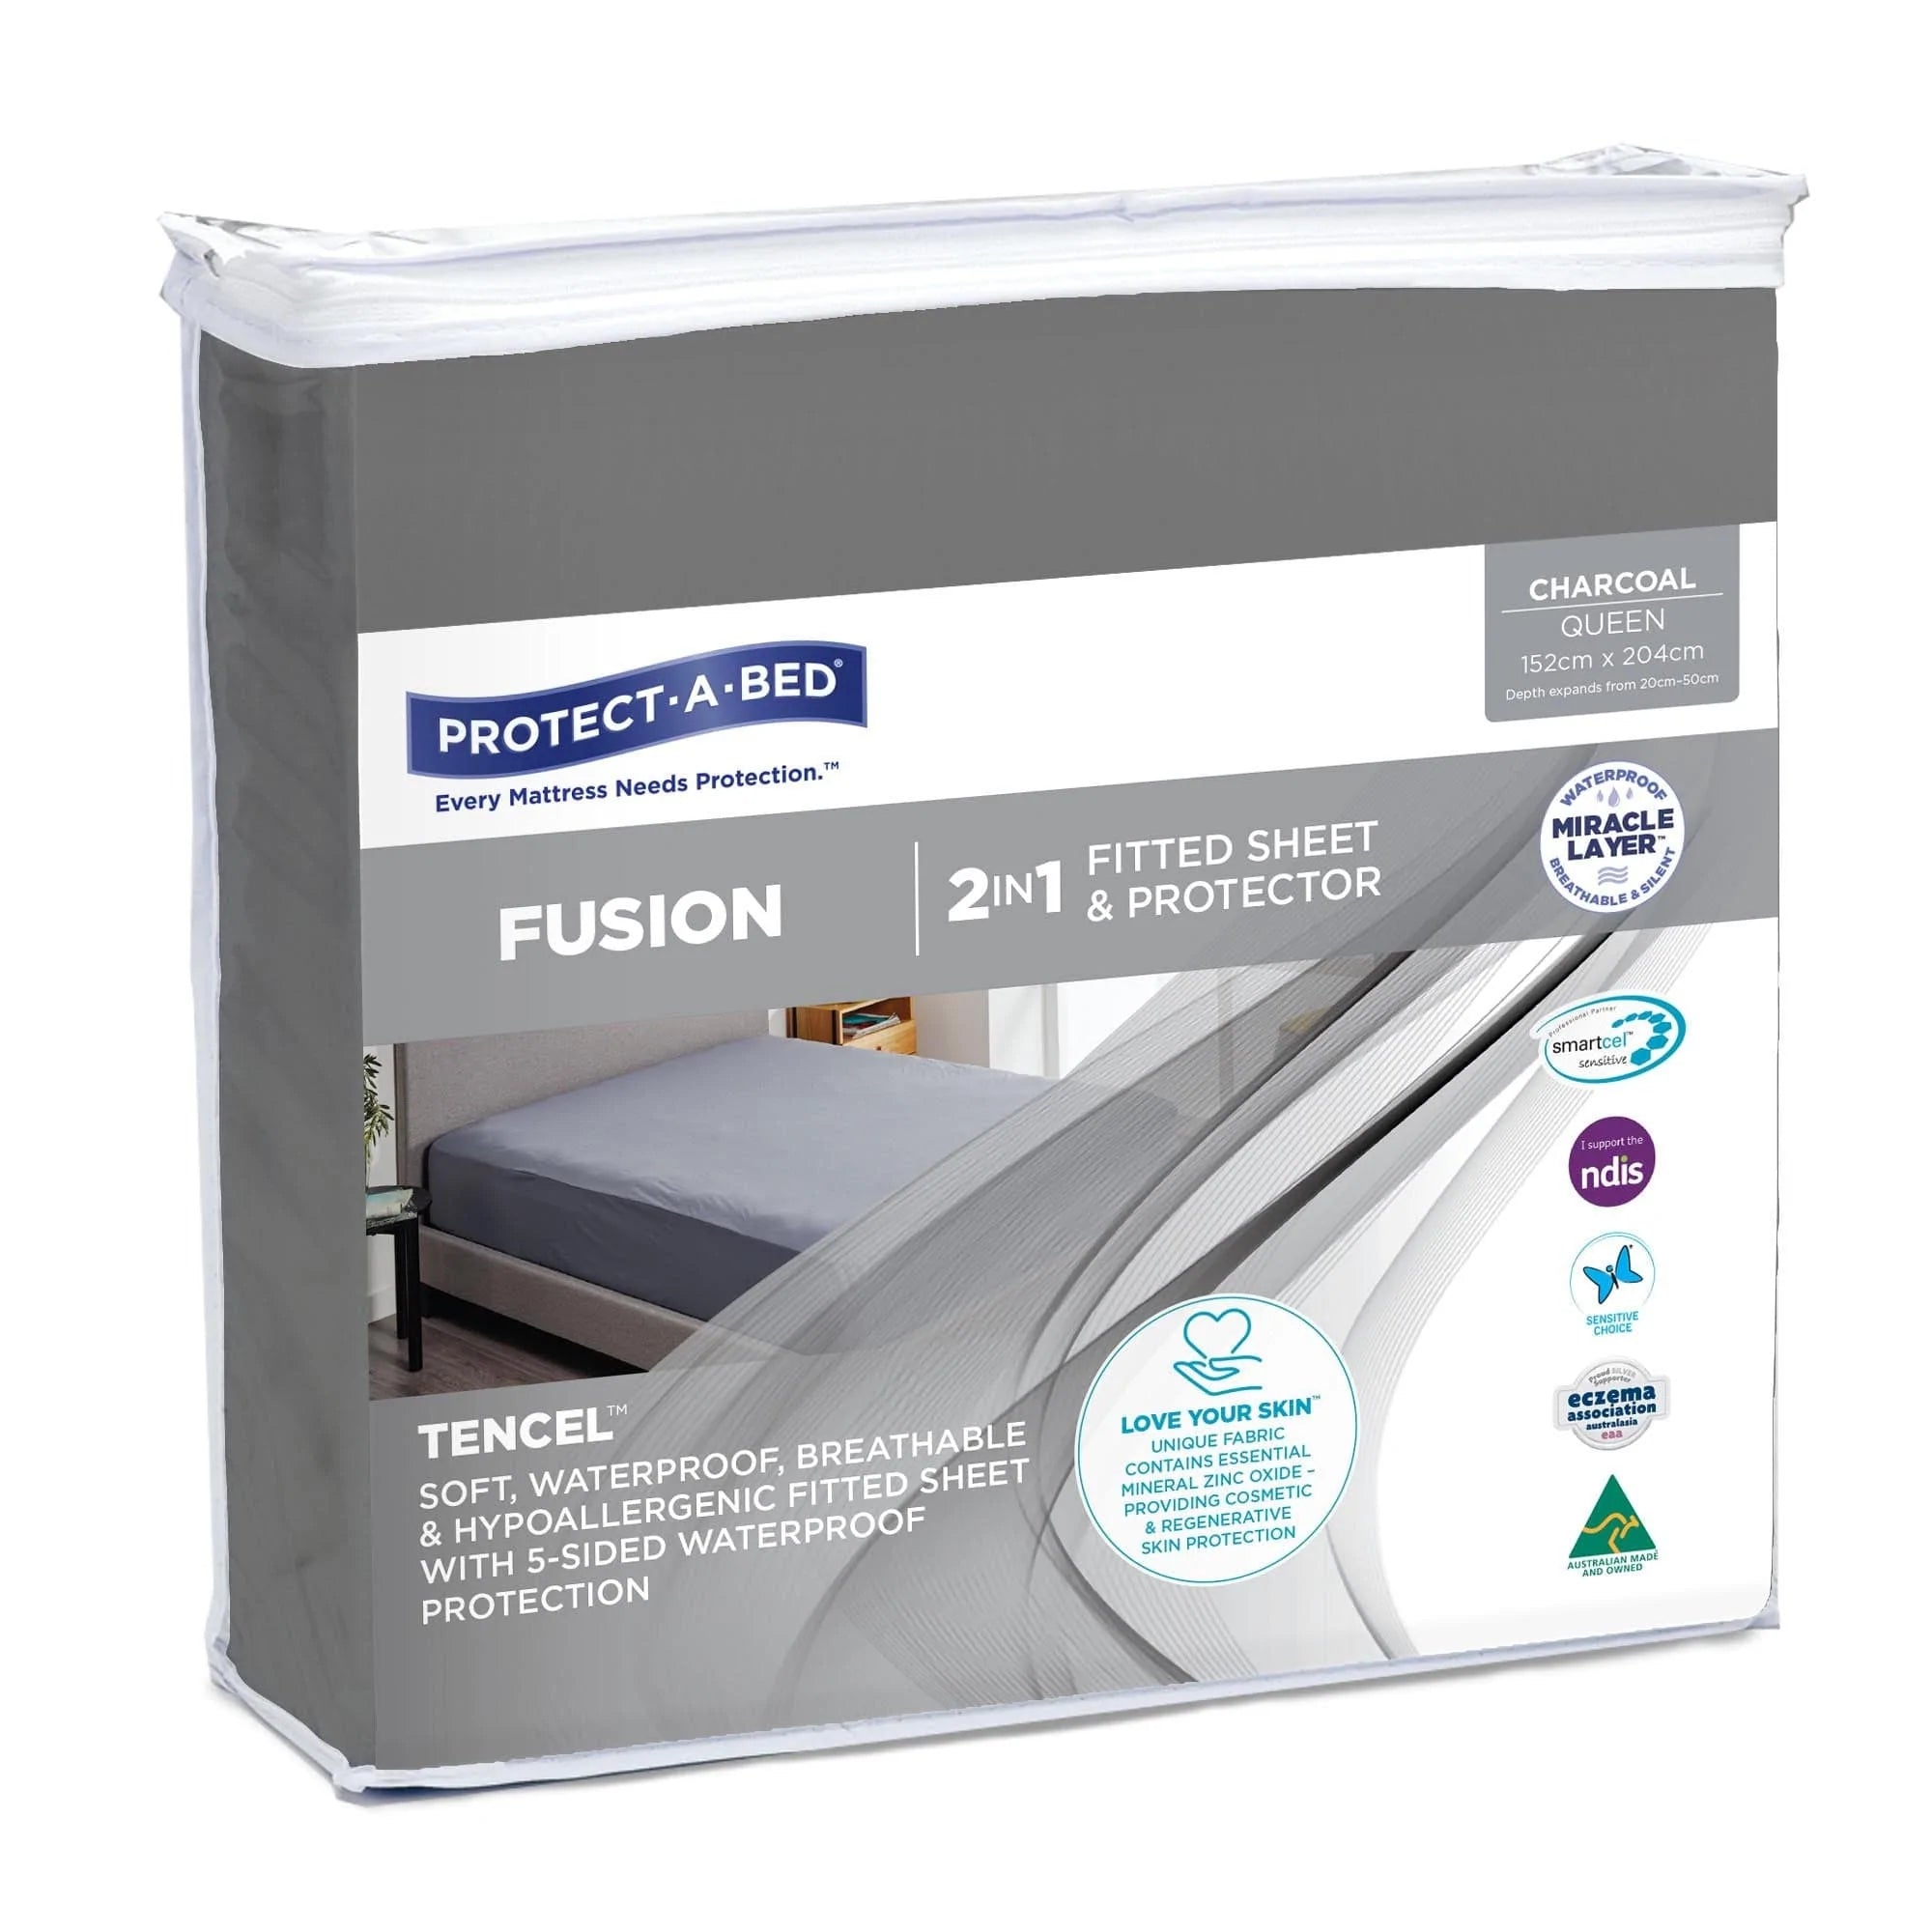 Protect A Bed Queen / Charcoal Fusion Fitted Sheet SNUF0093QUE0__EA